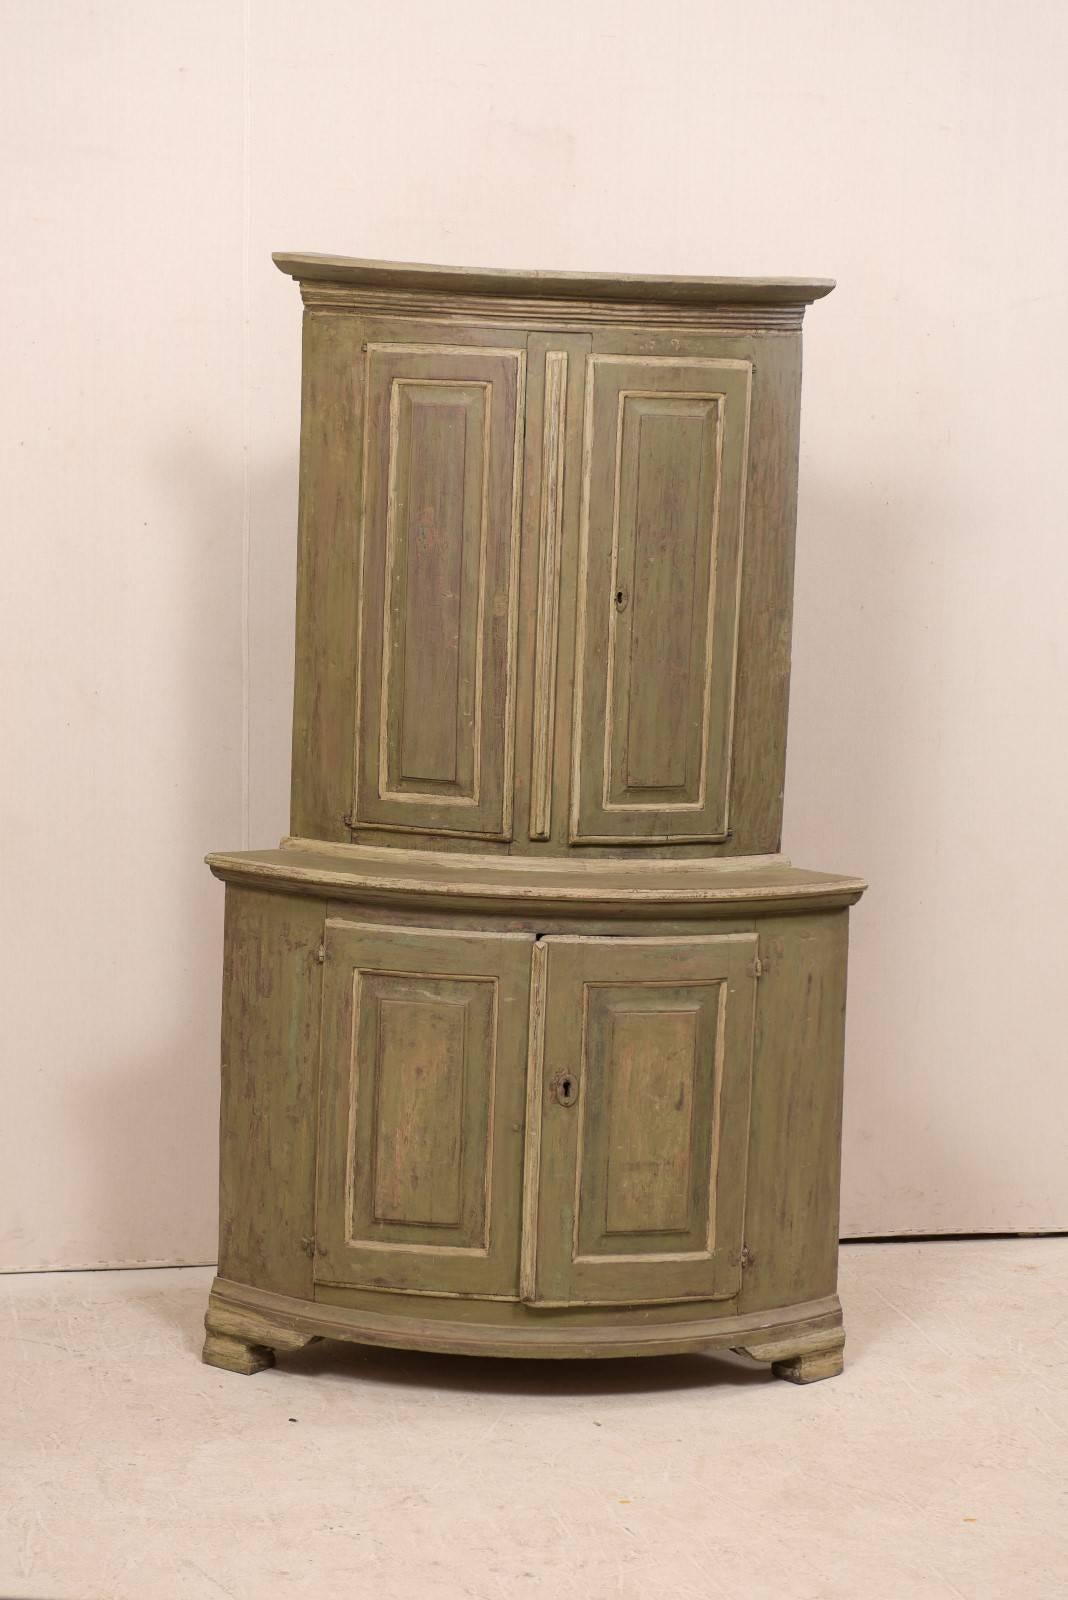 Swedish Period Gustavian painted wood corner cabinet, circa 1770-1780. This Swedish late 18th century antique corner cabinet features a curvy bow front shape, with recessed upper cabinet and raised on bracket feet. There are two upper doors over two